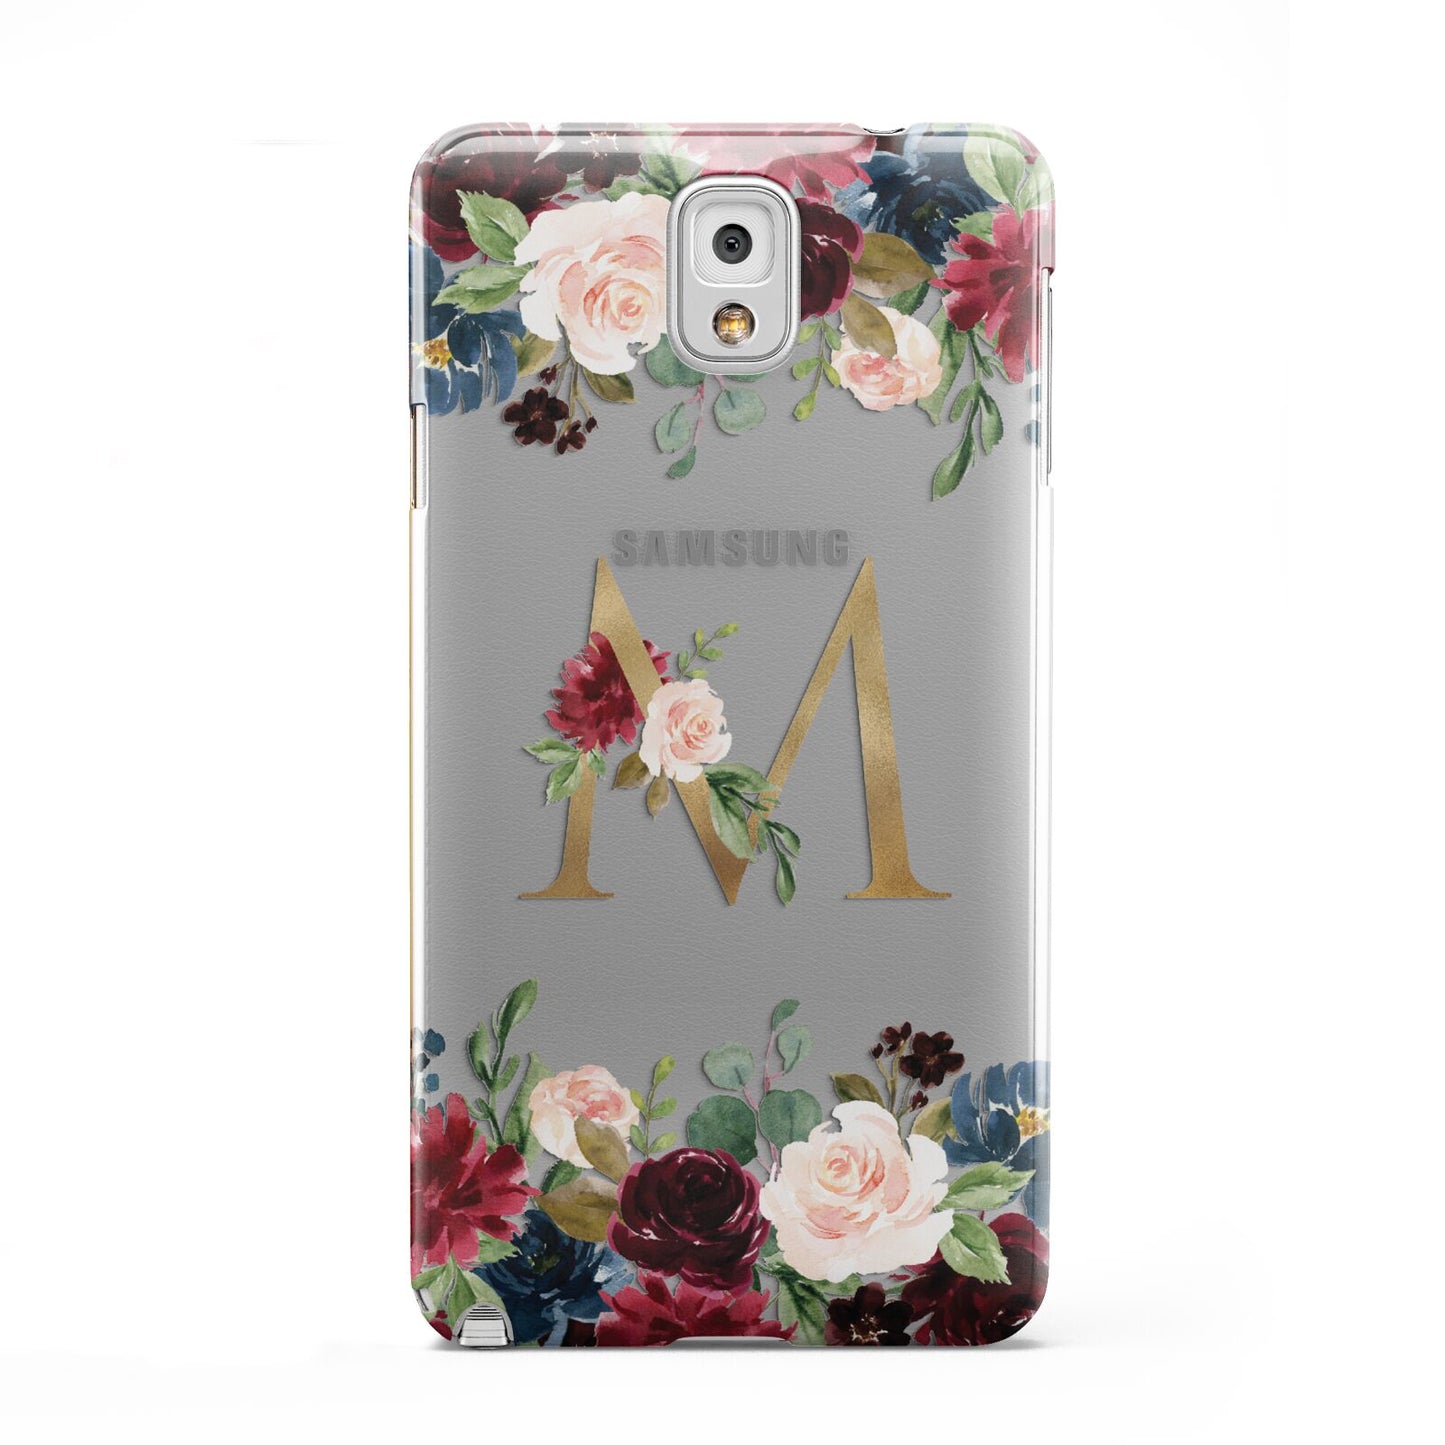 Personalised Clear Monogram Floral Samsung Galaxy Note 3 Case